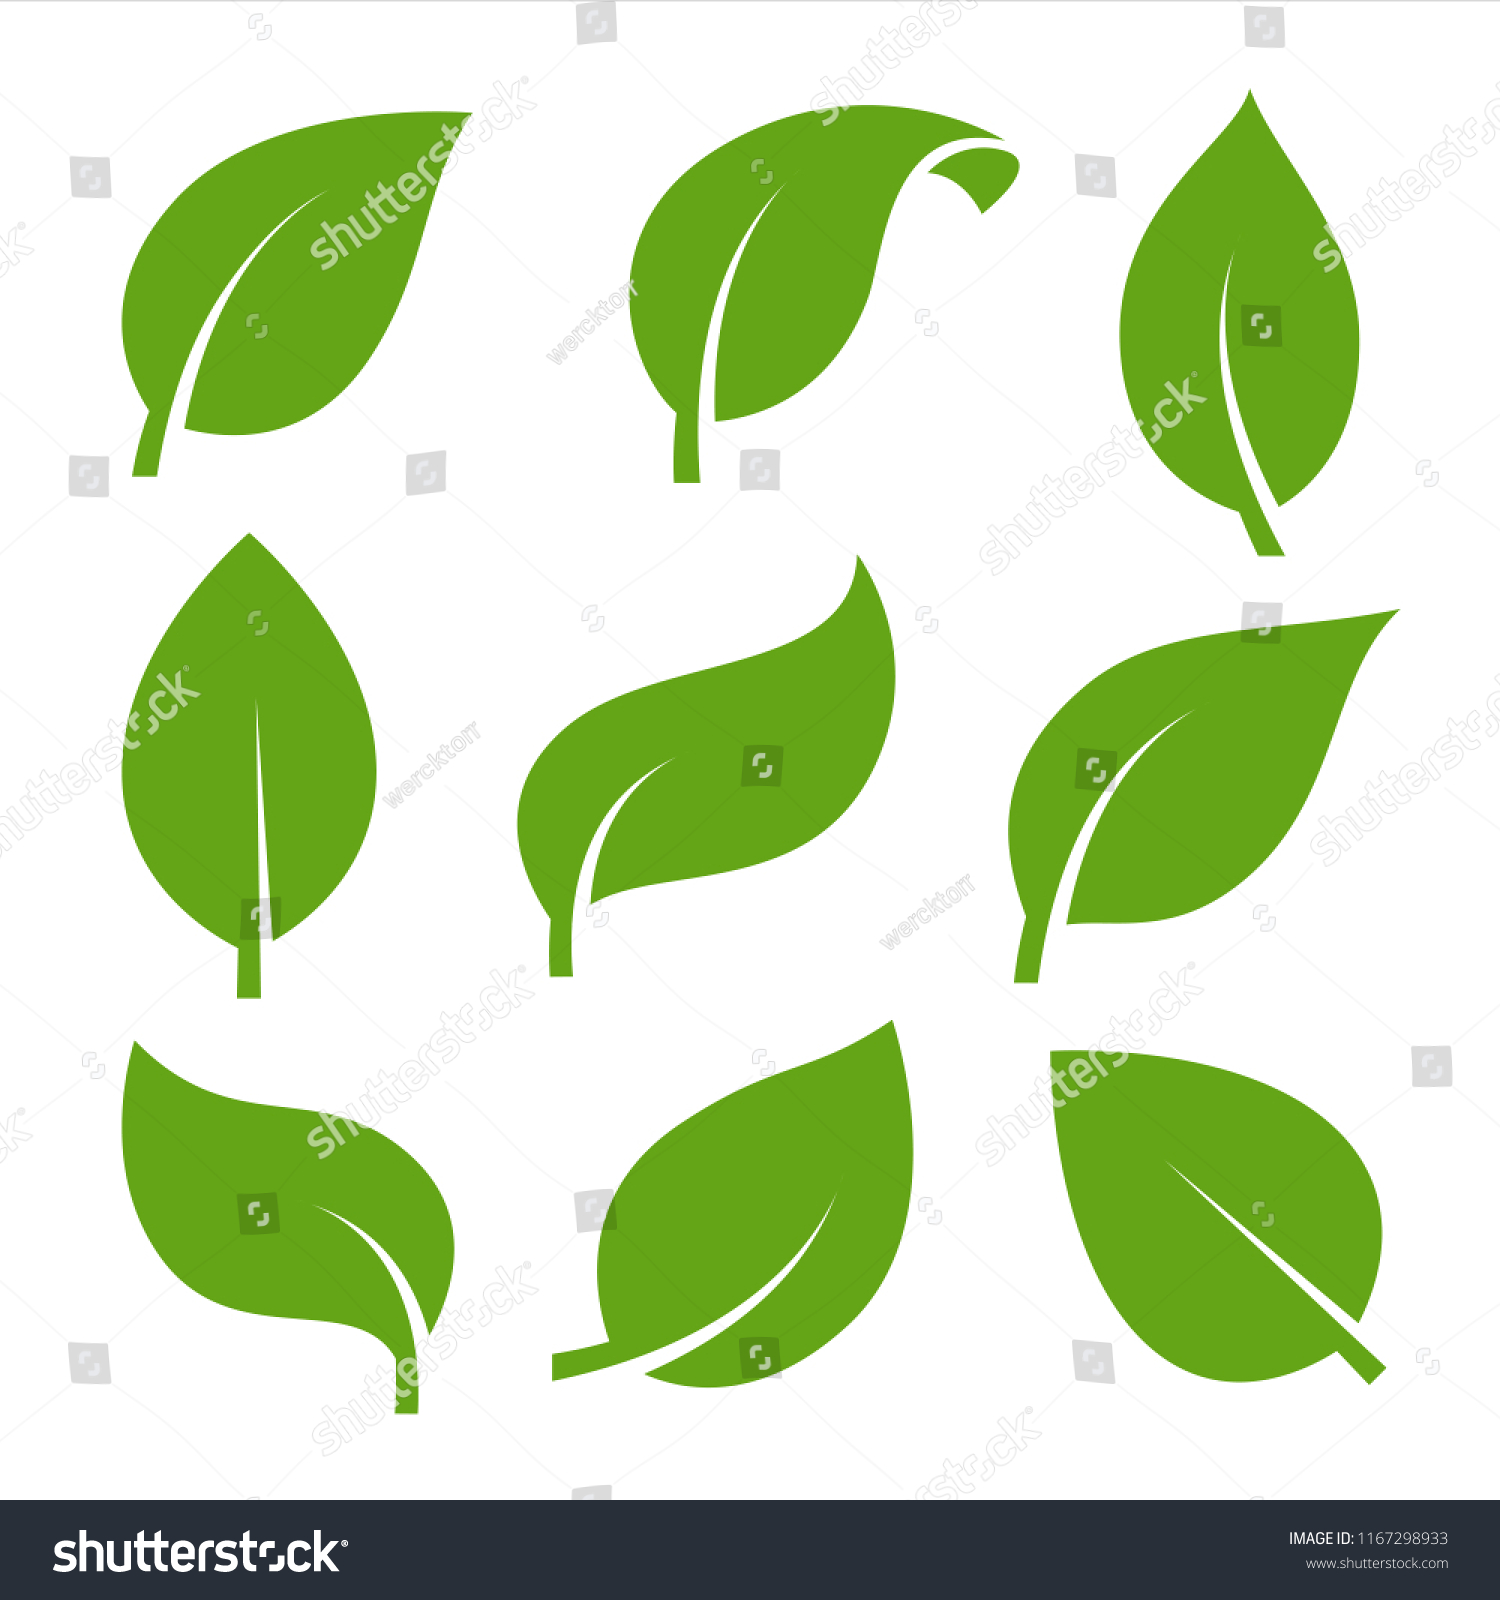 SVG of Eco green color leaf vector logo flat icon set. Isolated leaves shapes on white background. Bio plant and tree floral forest concept design. svg